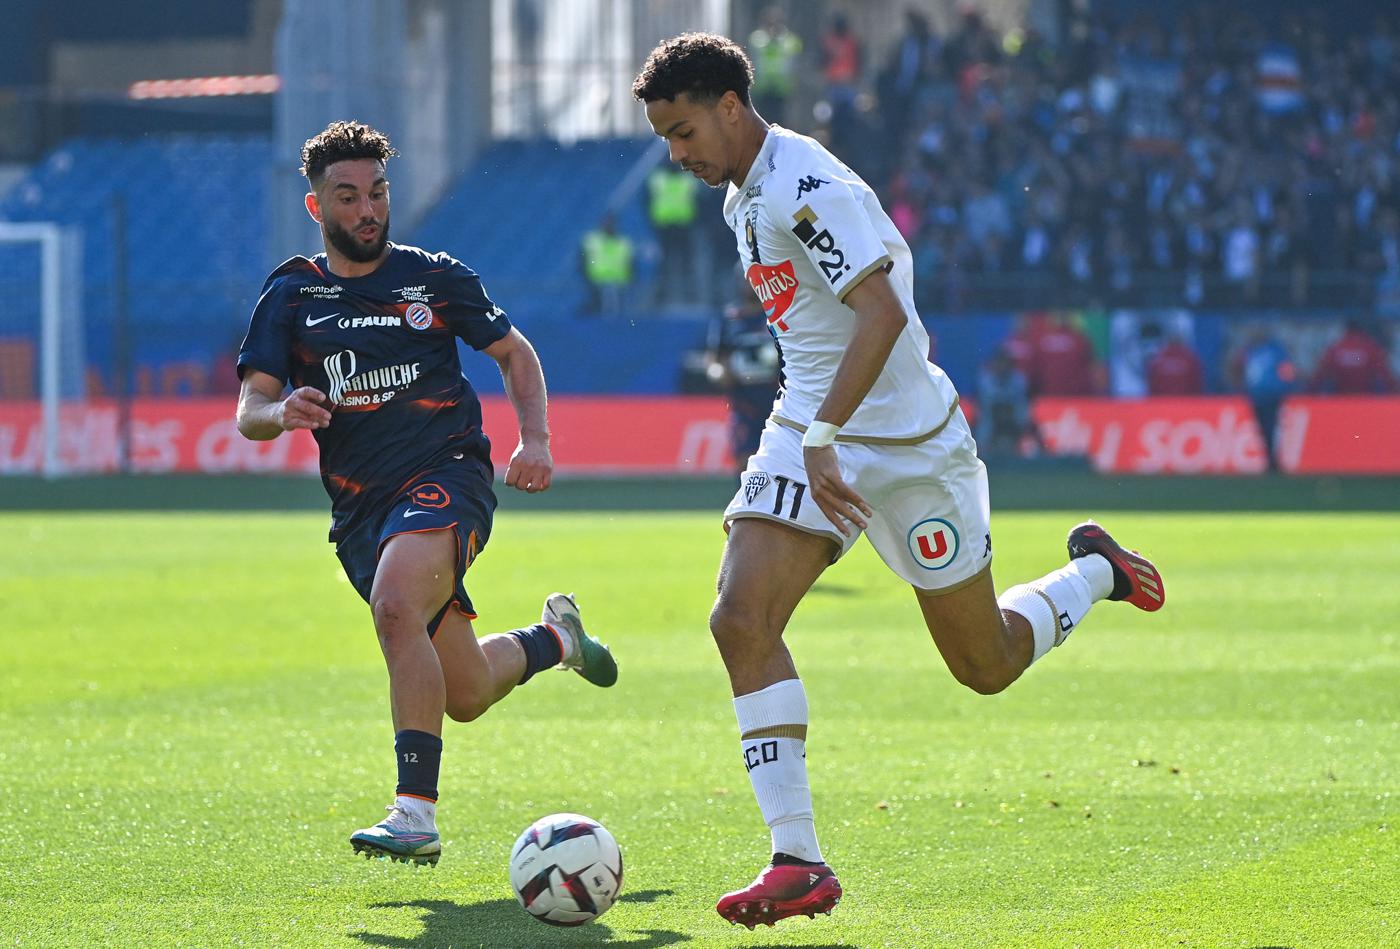 Montpellier vs Angers - 5-0. French Championship, 26th round. Match review, statistics.